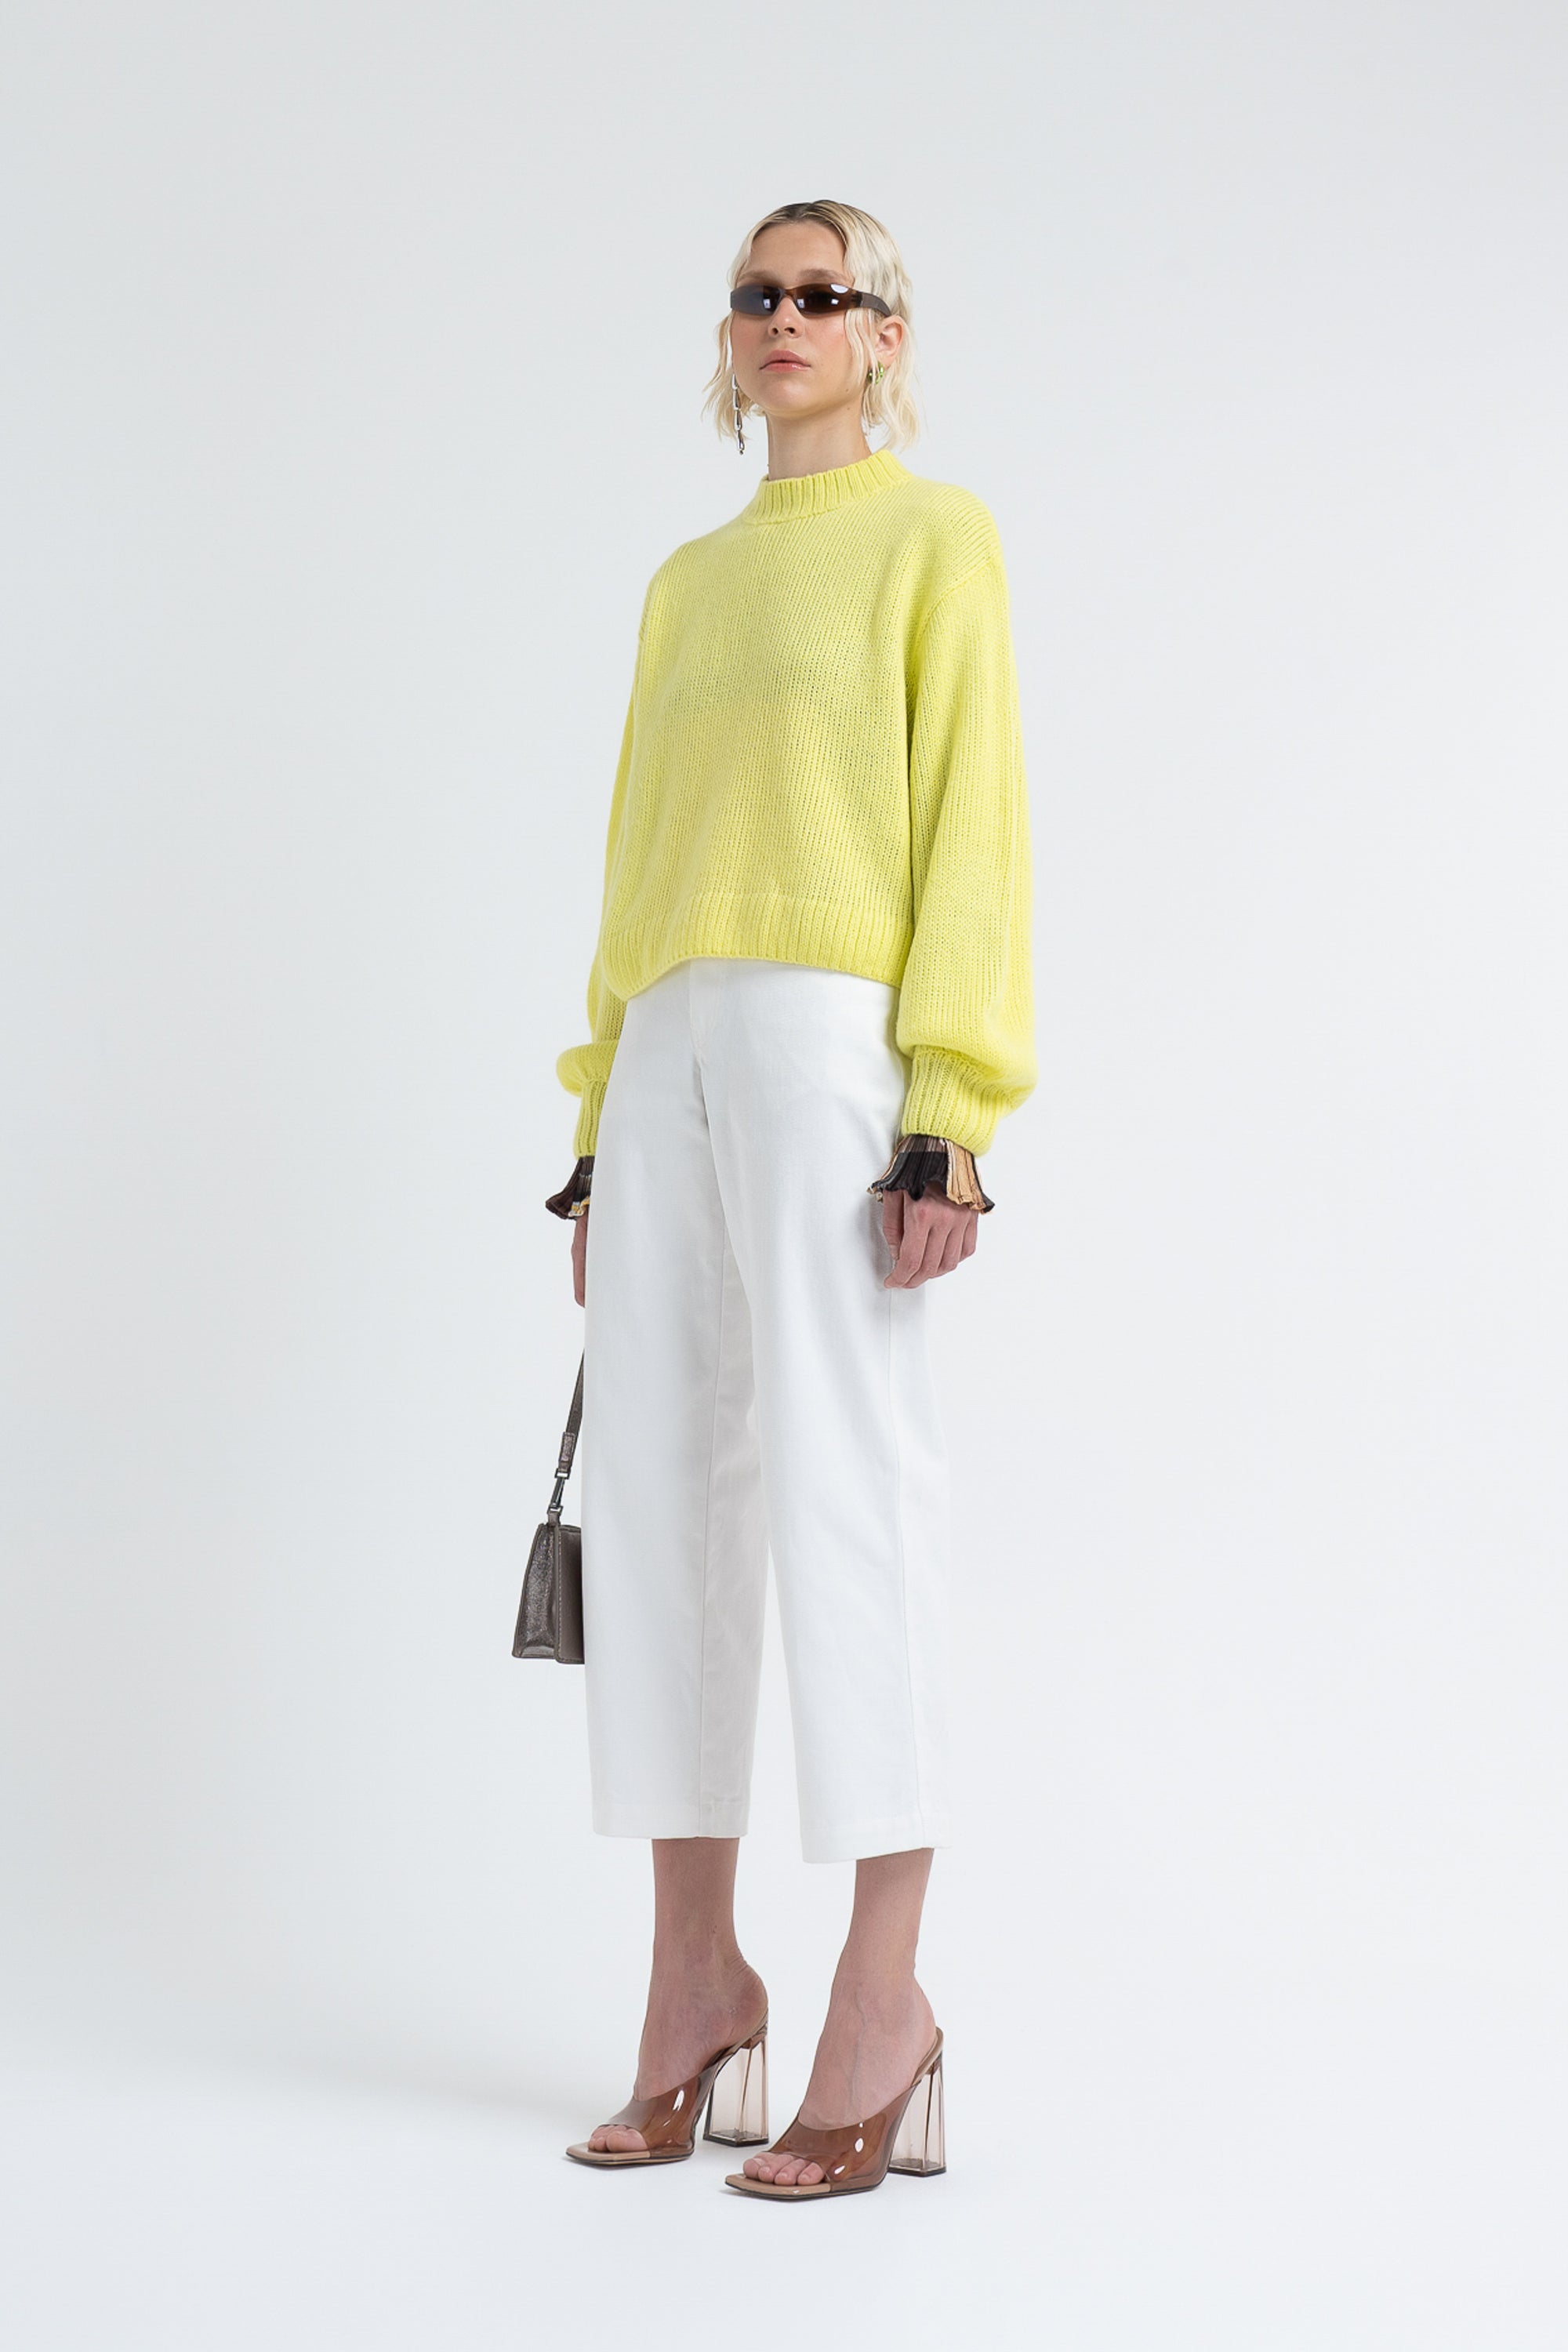 Arthur Apparel Lemon Sublime Cropped Oversized Sweater with Dropped Shoulder in Acrylic Jersey Knit